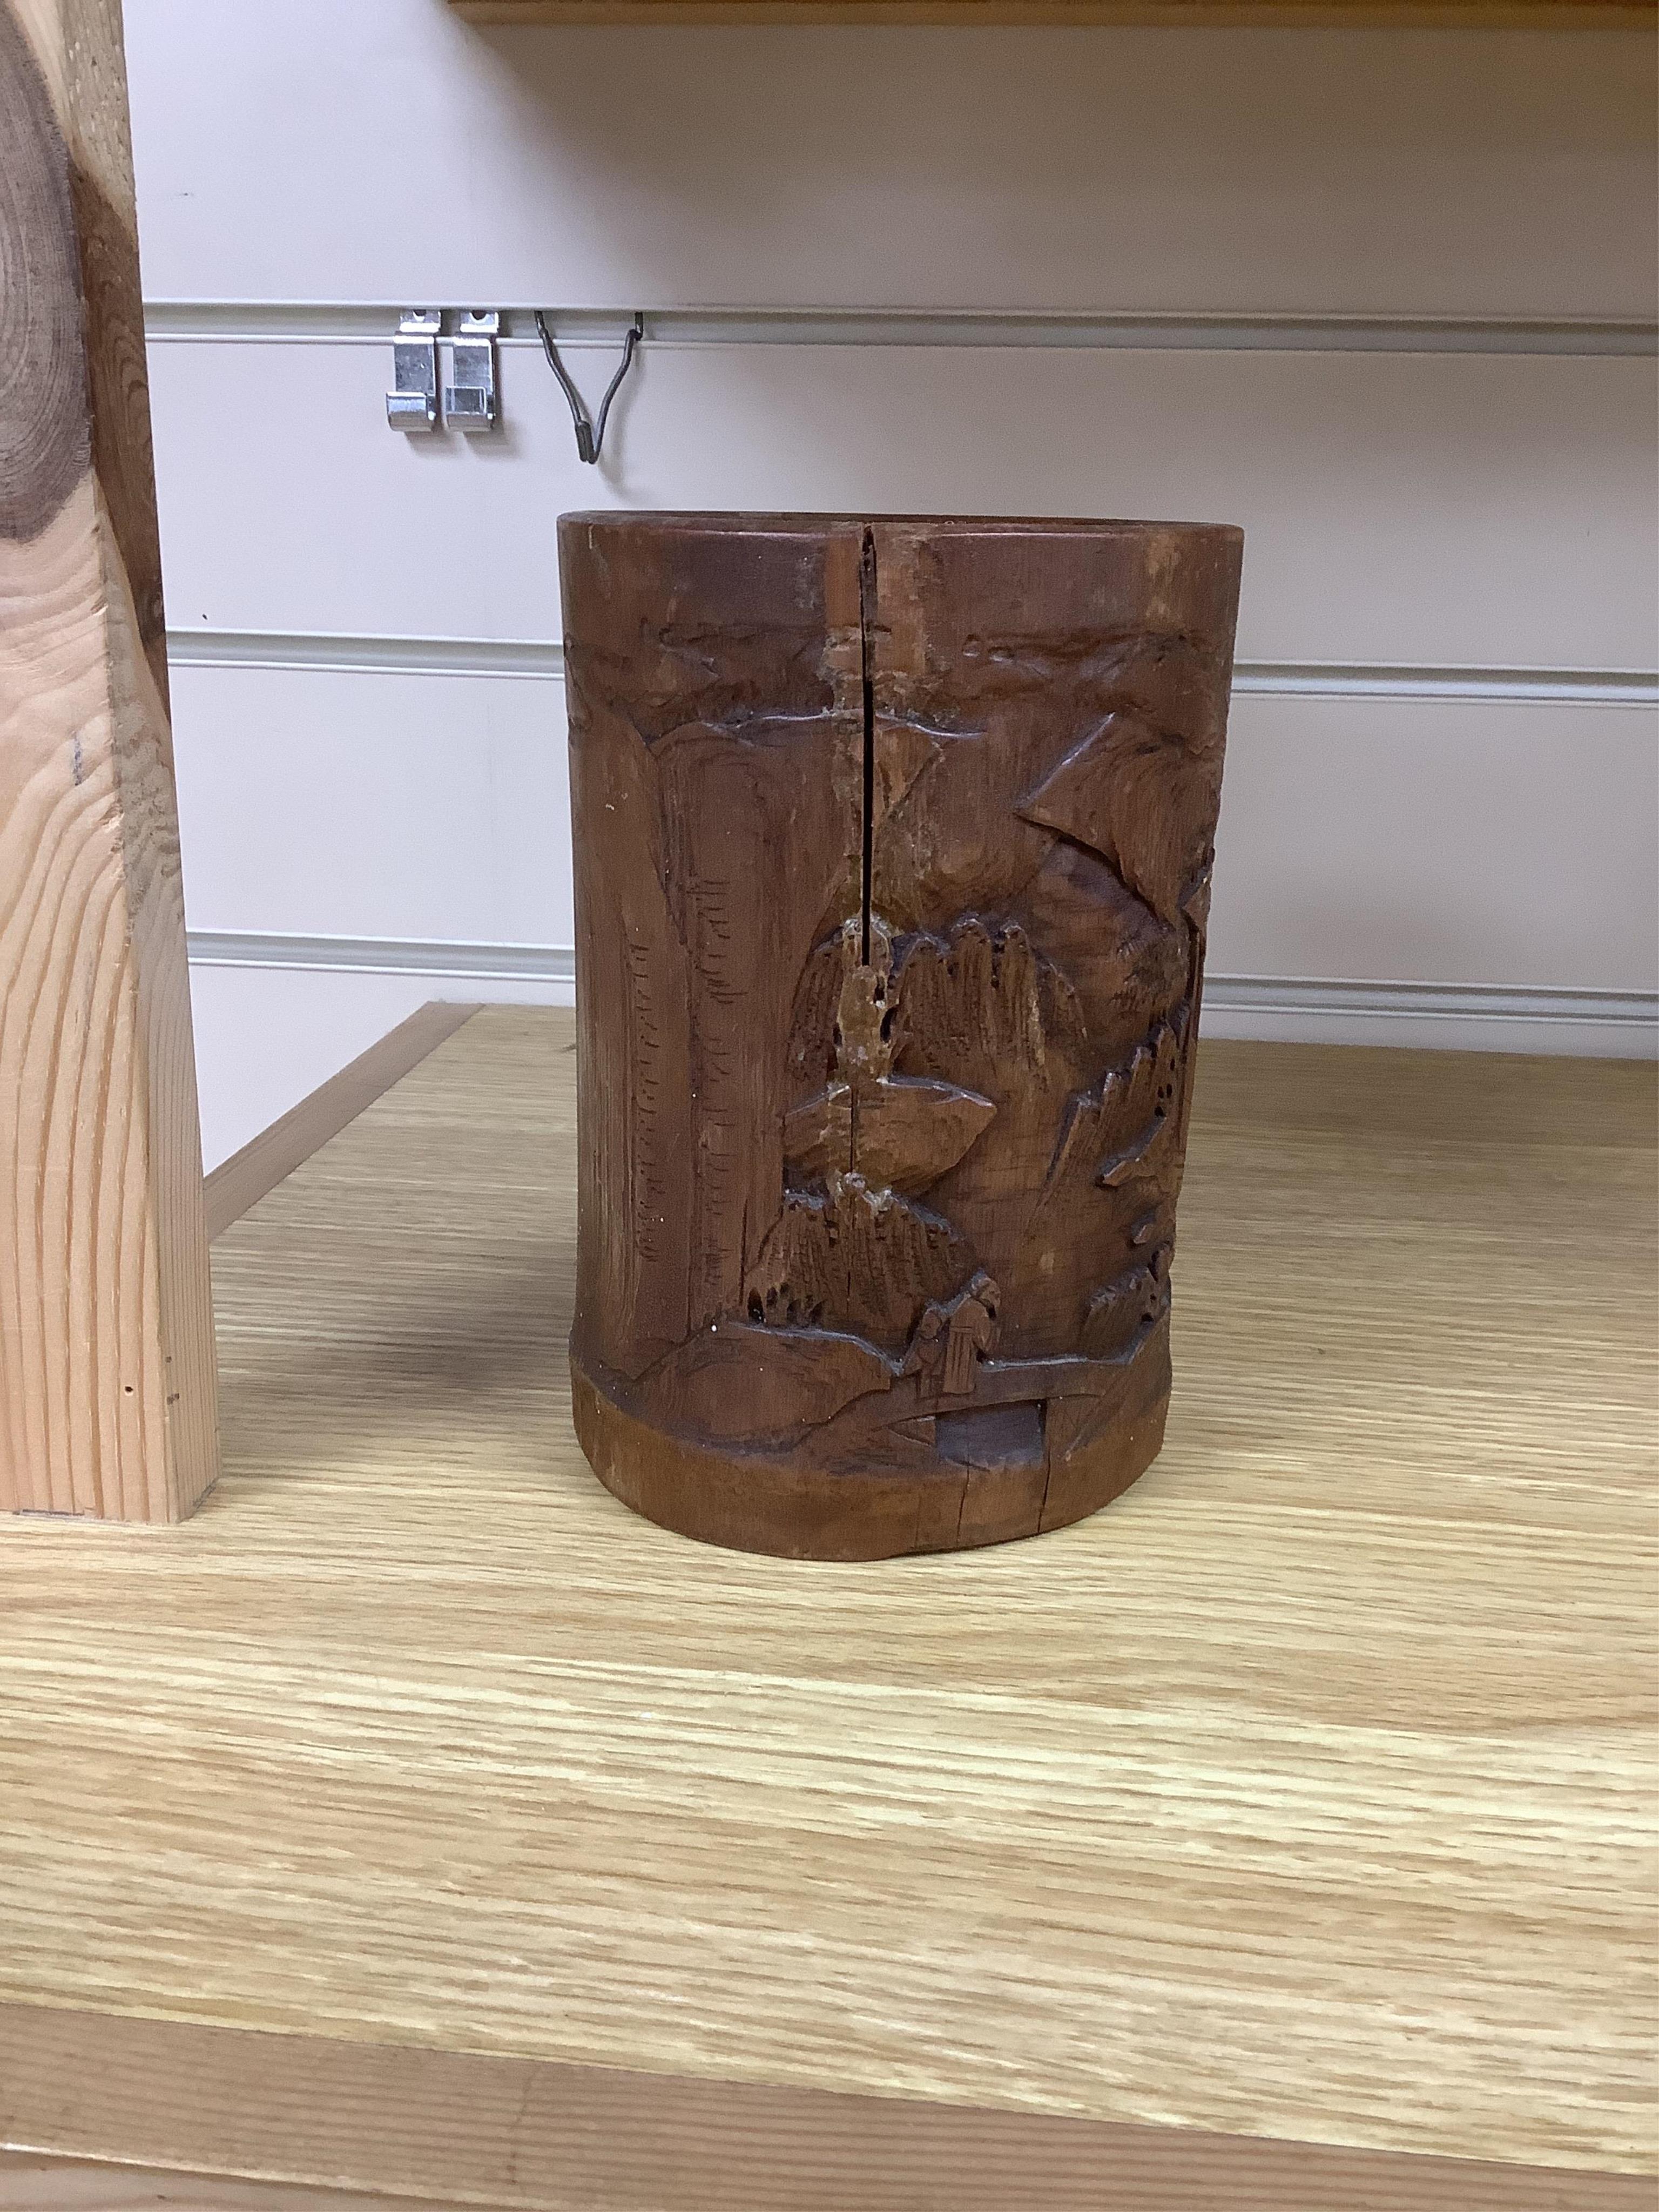 A 19th century Chinese bamboo brushpot and a rootwood and rosewood scholar's stand, root wood stand 30cm wide. Condition - some damage and repairs